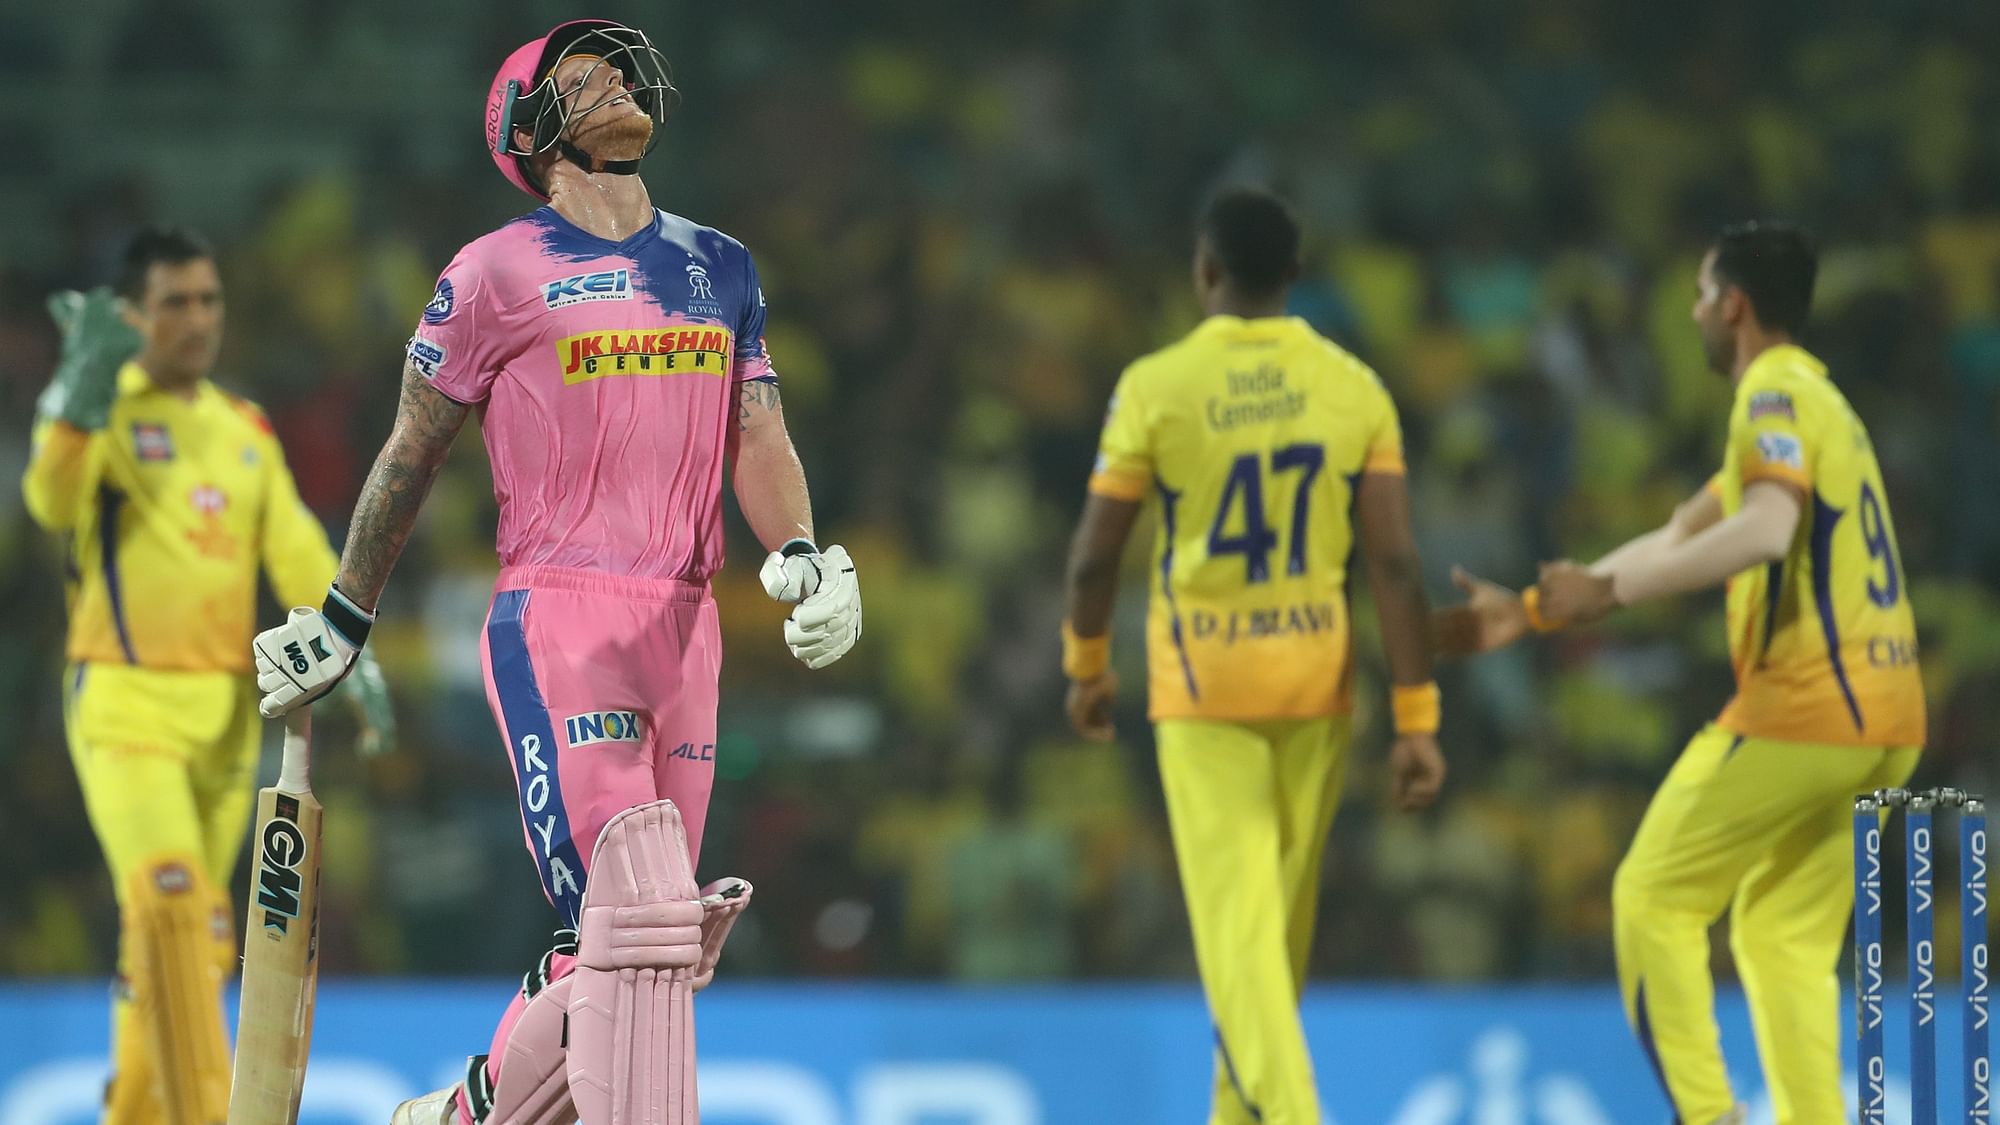 RR vs CSK Live Streaming: The Rajasthan Royals Vs Chennai Super Kings match will be held at Sharjah Cricket Stadium. (Image used for representation only)